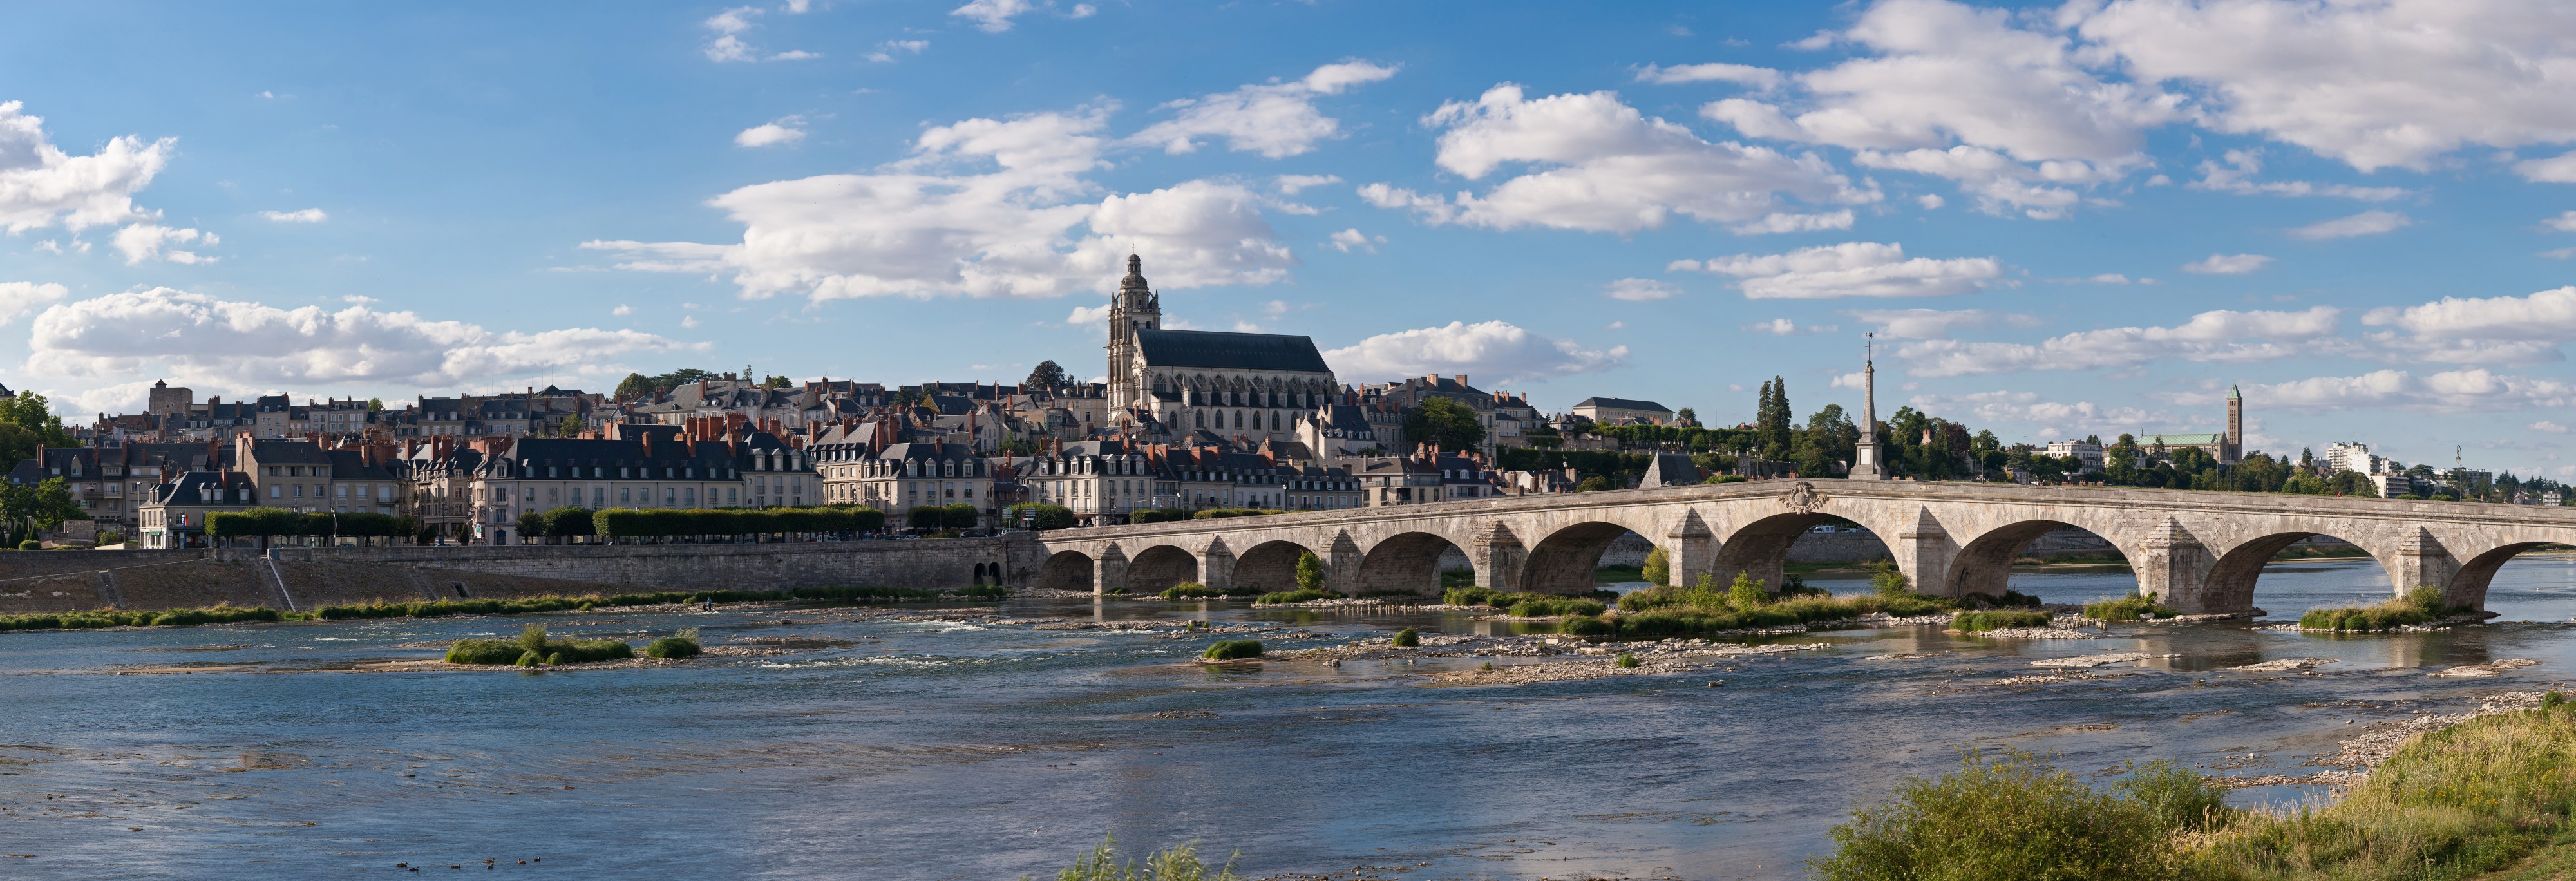 Blois Loire Panorama - July 2011